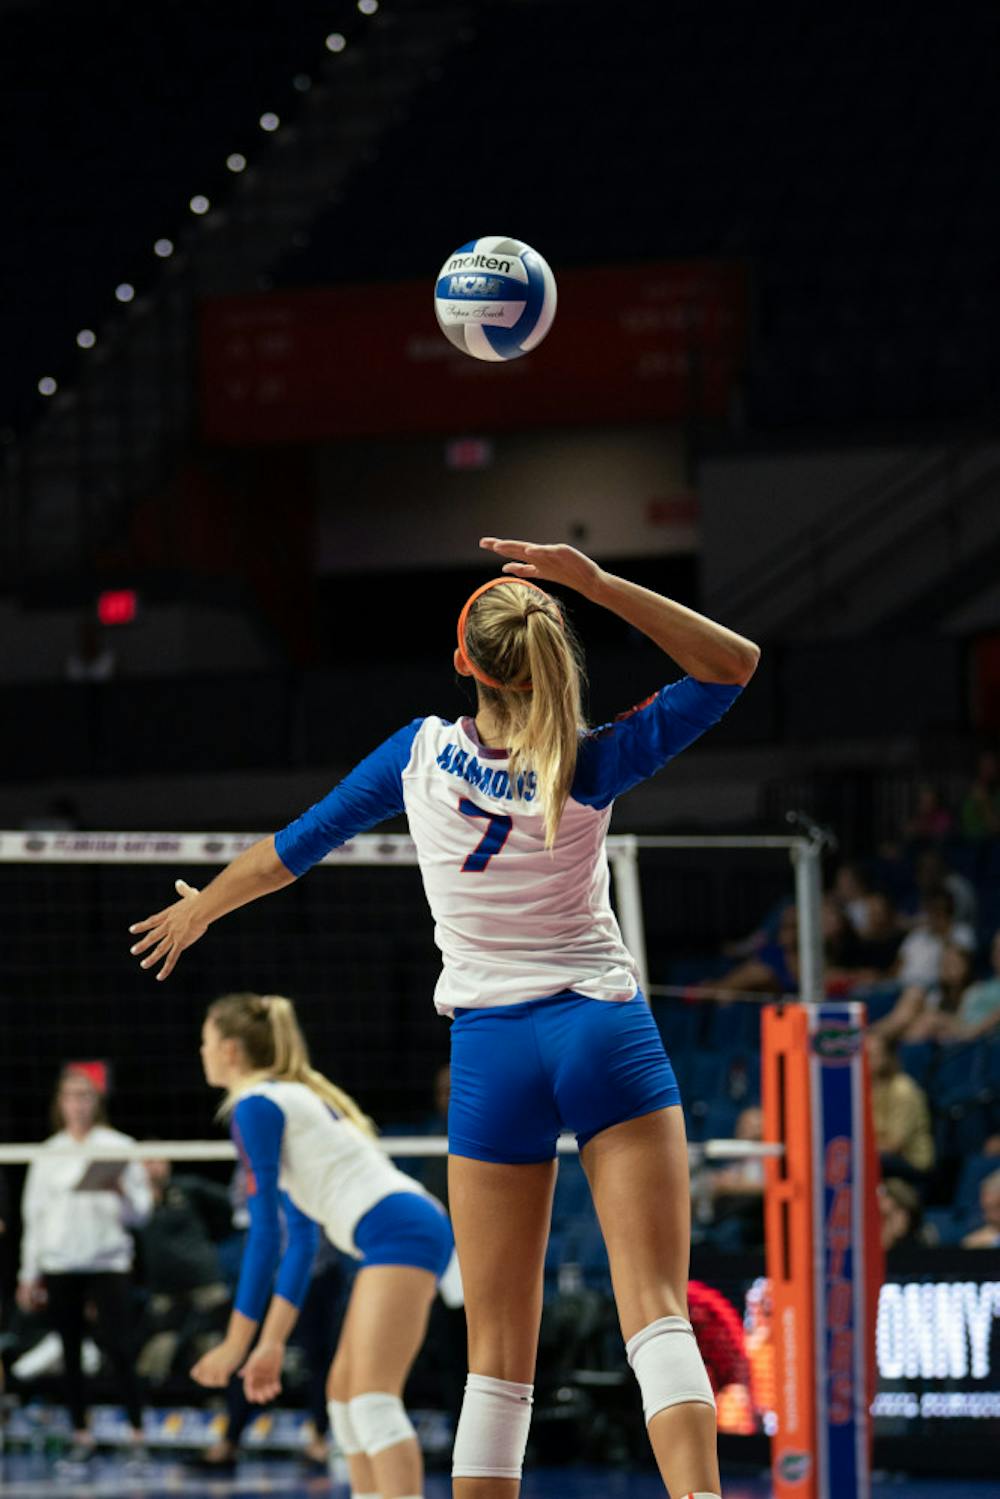 <p dir="ltr"><span>Sophomore outside hitter Paige Hammons recorded a game-high 16 kills and added four service aces in Florida’s four-set win against Arkansas on Sunday afternoon.</span></p><p dir="ltr"><span> </span></p>